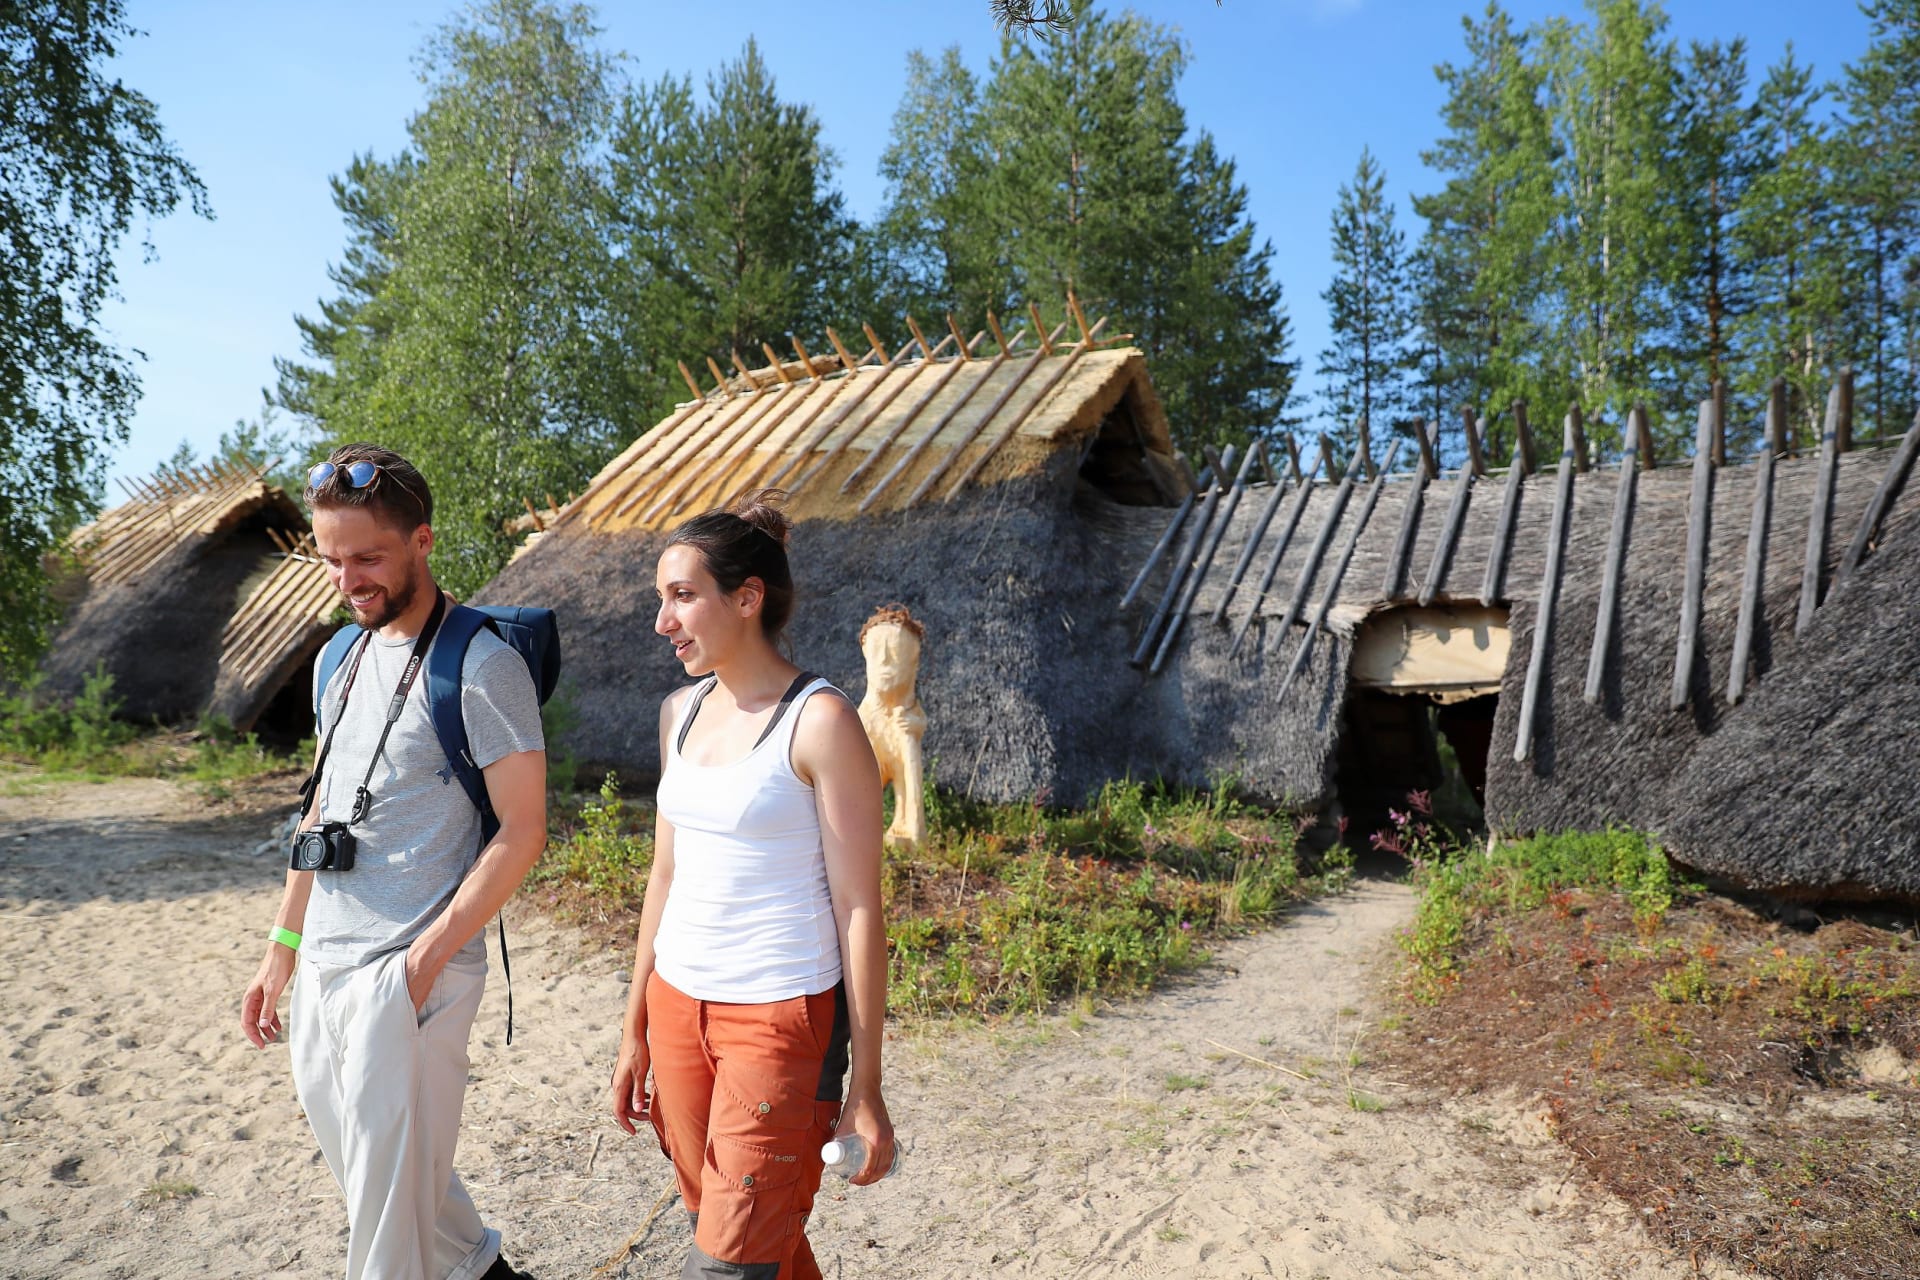 Stone Age dwellings can be visited in the Kierikki Stone Age Village.